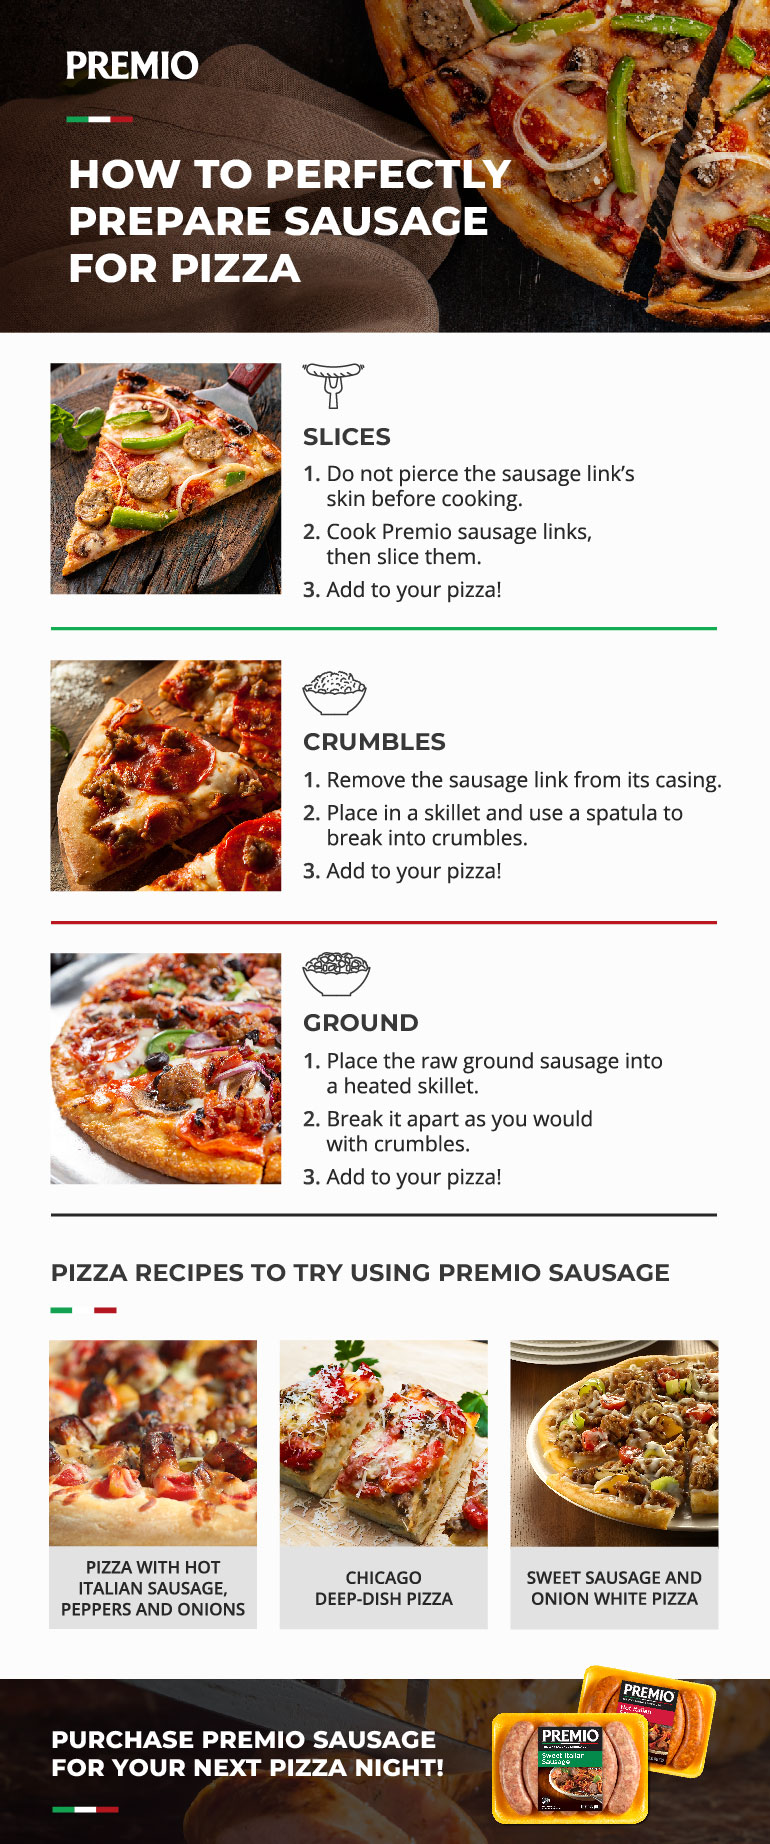 How to perfectly prepare sausage for pizza